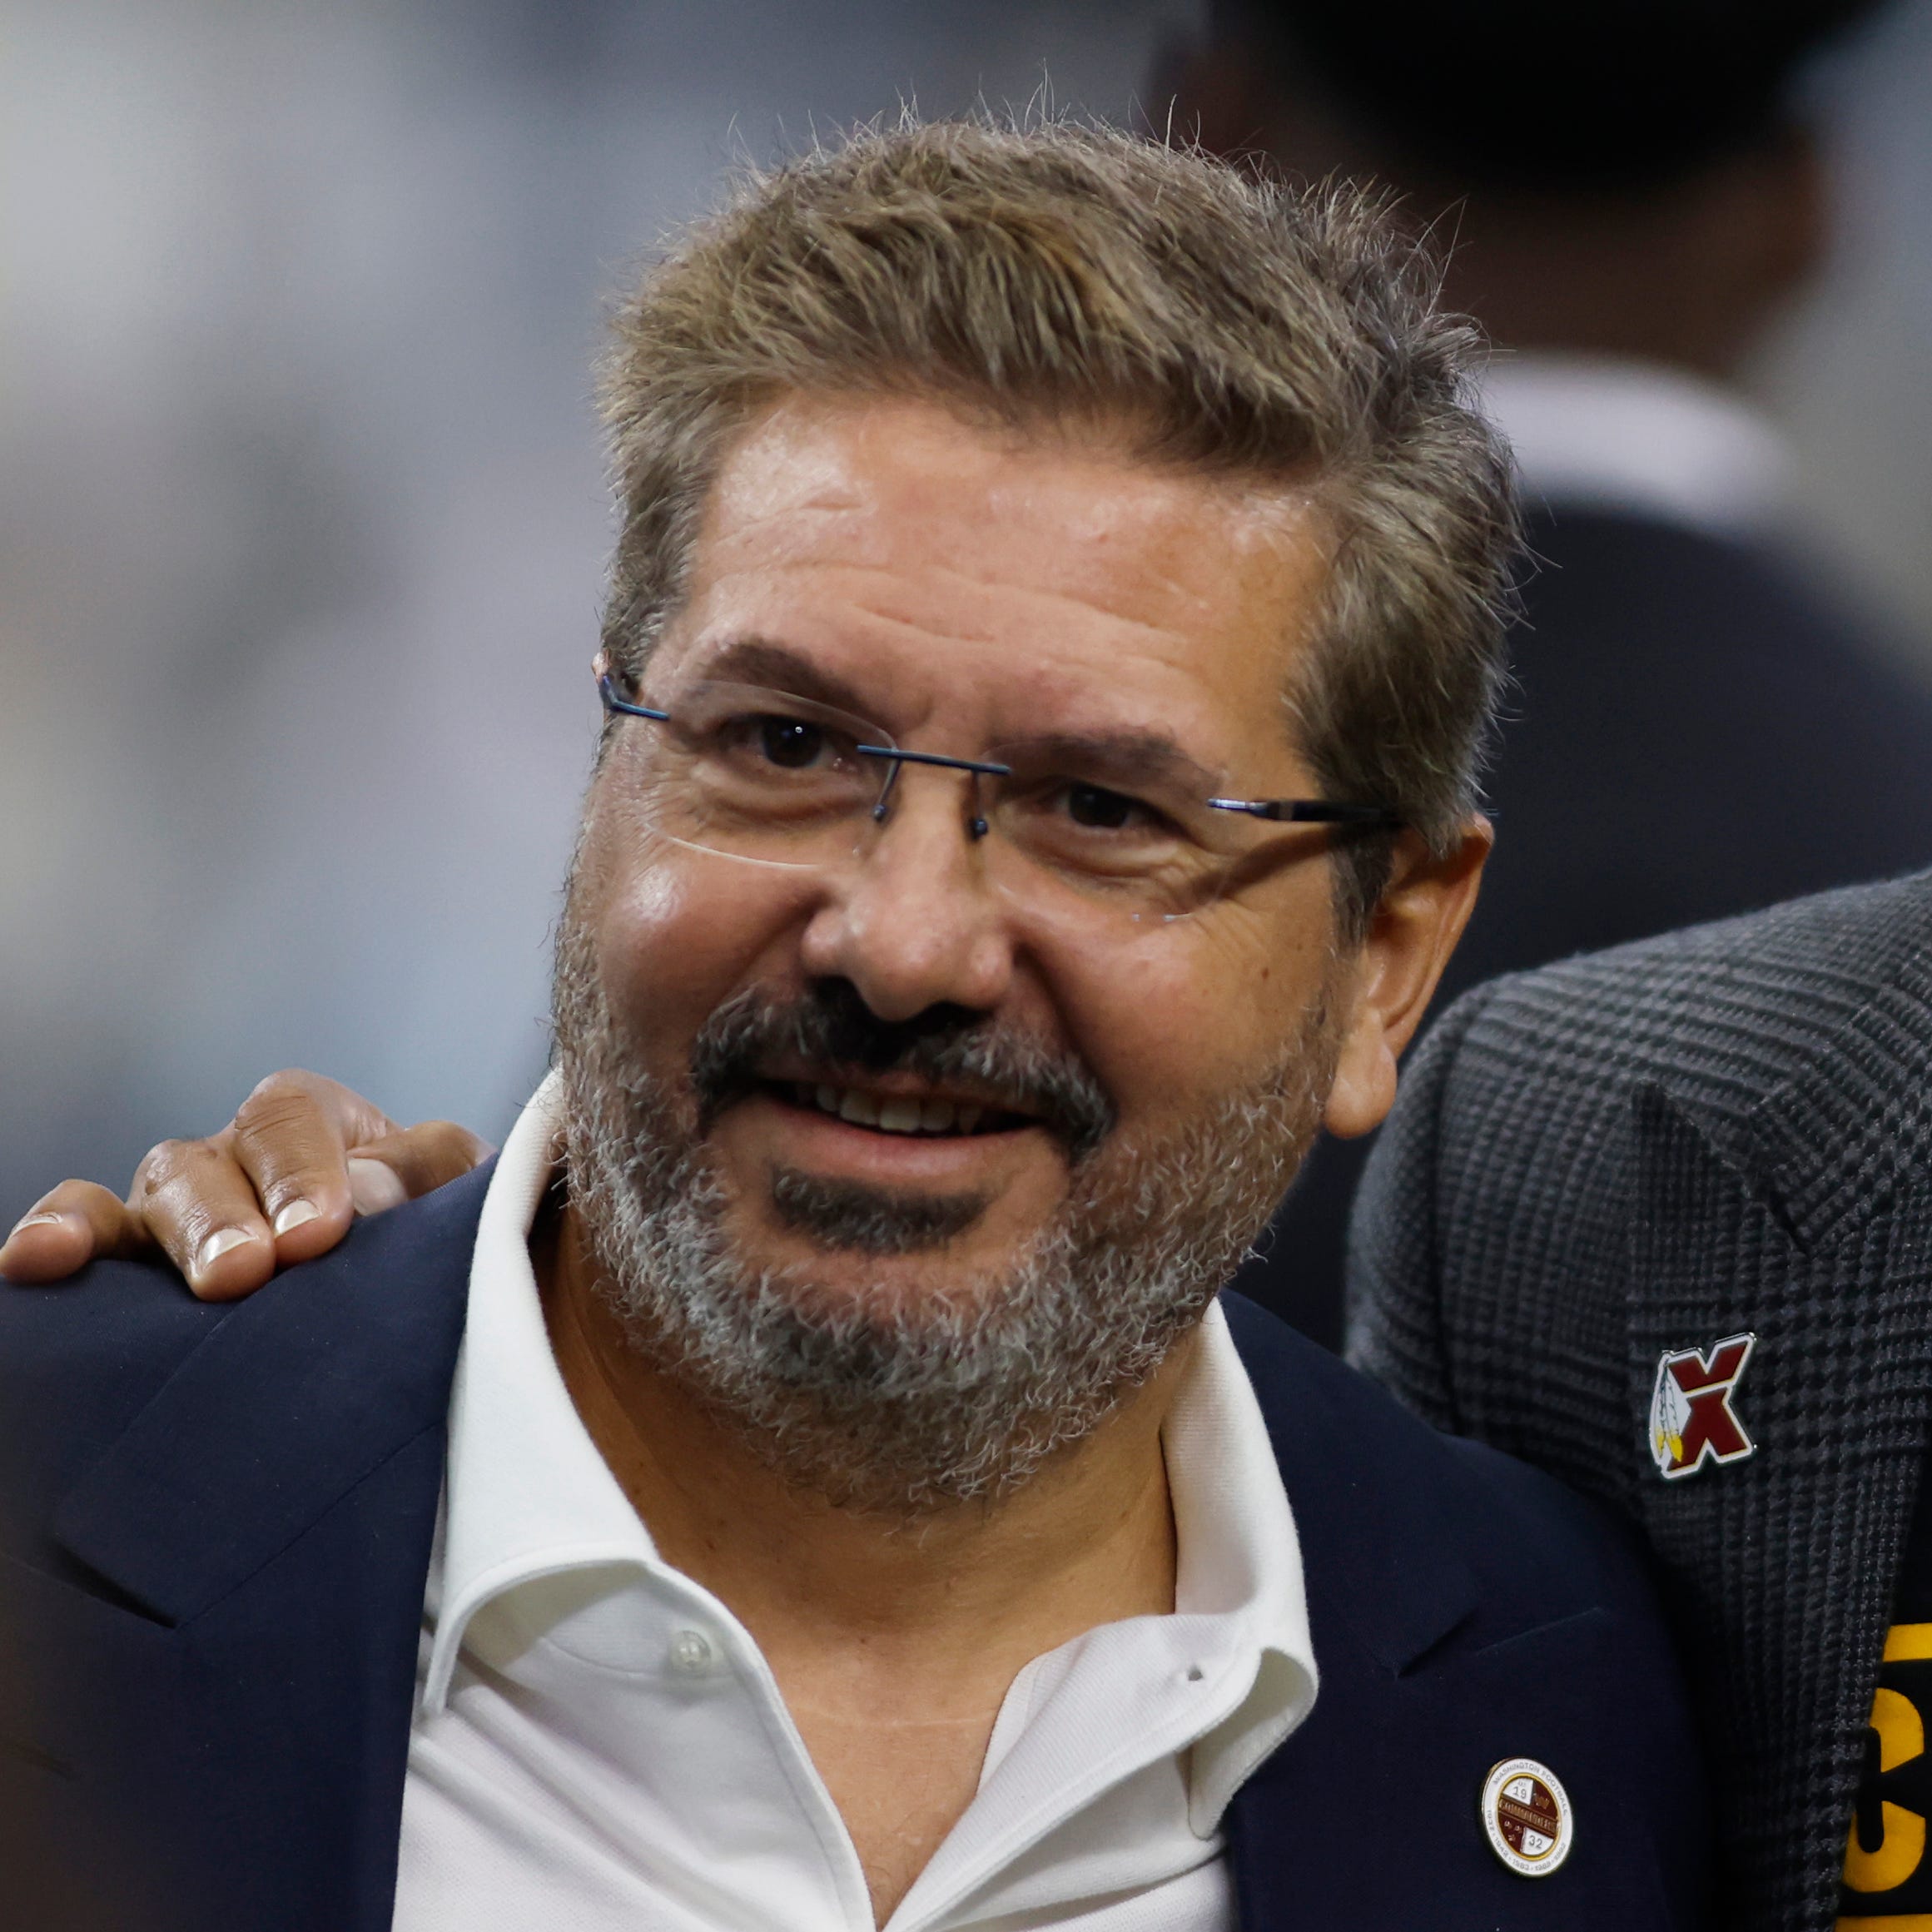 Washington Commanders owner Dan Snyder (L) and president Jason Wright  (R) pose for a photo before the game against the Dallas Cowboys at AT&T Stadium.